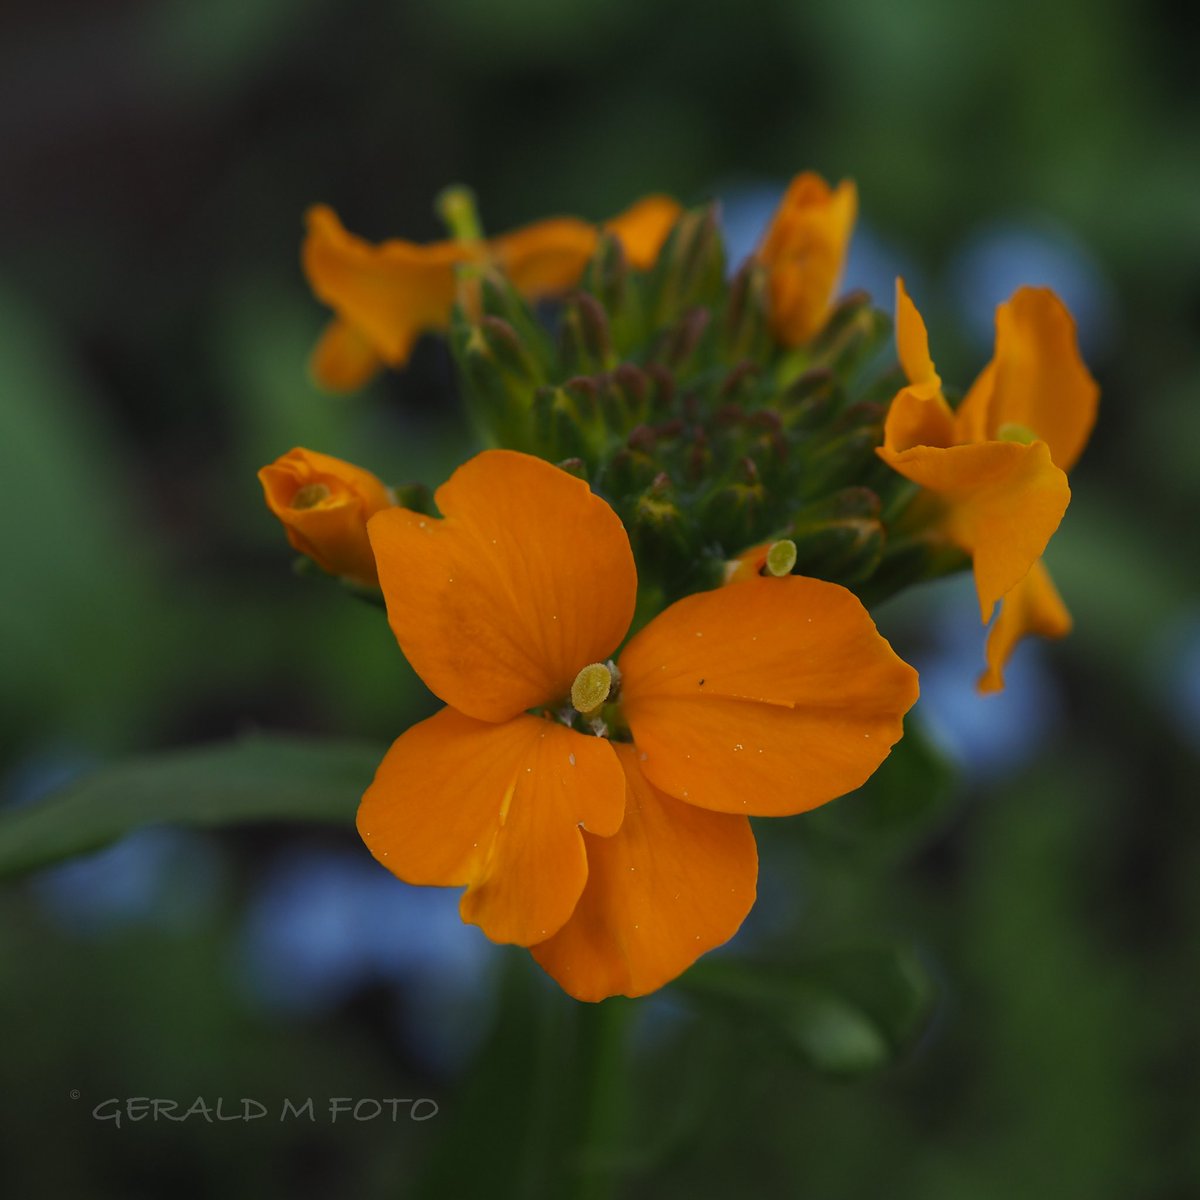 [ Erysimum cheiri ] as found on current #lawnpatrol for belated #FlowersOnFriday and early #sundayyellow #macrophotography #flowerphotography straight out of the cam - no filter, no editing (just cropped)